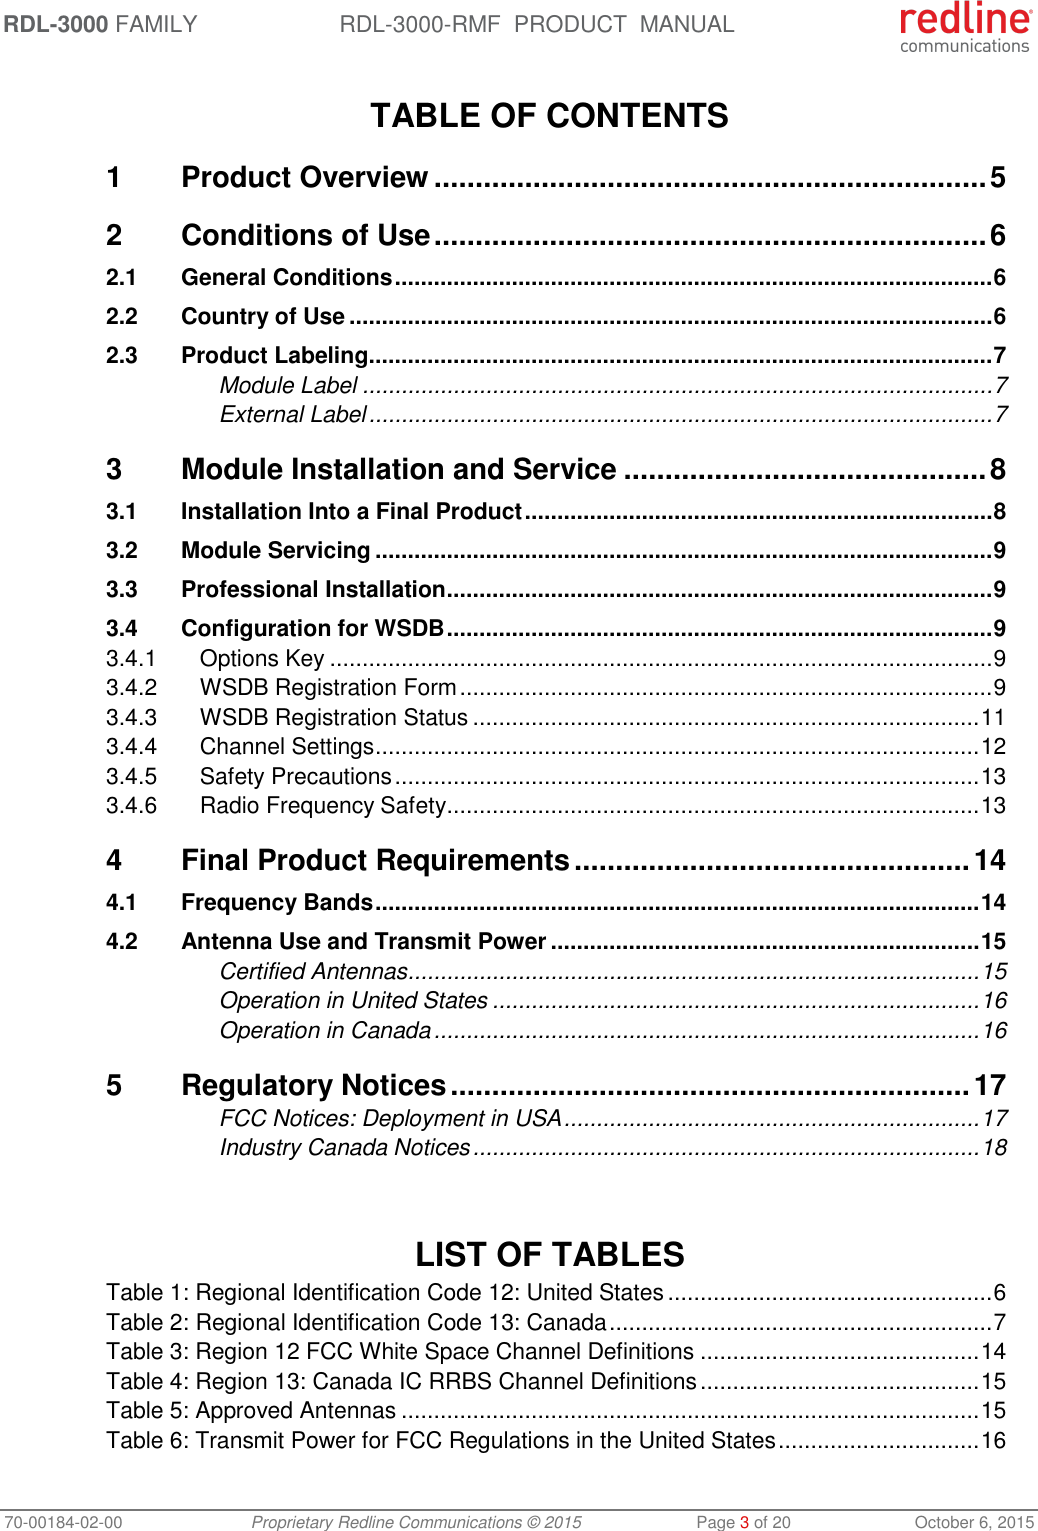 RDL-3000 FAMILY RDL-3000-RMF  PRODUCT  MANUAL 70-00184-02-00 Proprietary Redline Communications © 2015  Page 3 of 20  October 6, 2015  TABLE OF CONTENTS 1 Product Overview ................................................................... 5 2 Conditions of Use ................................................................... 6 2.1 General Conditions ............................................................................................ 6 2.2 Country of Use ................................................................................................... 6 2.3 Product Labeling ................................................................................................ 7 Module Label ................................................................................................. 7 External Label ................................................................................................ 7 3 Module Installation and Service ............................................ 8 3.1 Installation Into a Final Product ........................................................................ 8 3.2 Module Servicing ............................................................................................... 9 3.3 Professional Installation .................................................................................... 9 3.4 Configuration for WSDB .................................................................................... 9 3.4.1 Options Key ...................................................................................................... 9 3.4.2 WSDB Registration Form .................................................................................. 9 3.4.3 WSDB Registration Status .............................................................................. 11 3.4.4 Channel Settings ............................................................................................. 12 3.4.5 Safety Precautions .......................................................................................... 13 3.4.6 Radio Frequency Safety .................................................................................. 13 4 Final Product Requirements ................................................ 14 4.1 Frequency Bands ............................................................................................. 14 4.2 Antenna Use and Transmit Power .................................................................. 15 Certified Antennas ........................................................................................ 15 Operation in United States ........................................................................... 16 Operation in Canada .................................................................................... 16 5 Regulatory Notices ............................................................... 17 FCC Notices: Deployment in USA ................................................................ 17 Industry Canada Notices .............................................................................. 18    LIST OF TABLES Table 1: Regional Identification Code 12: United States .................................................. 6 Table 2: Regional Identification Code 13: Canada ........................................................... 7 Table 3: Region 12 FCC White Space Channel Definitions ........................................... 14 Table 4: Region 13: Canada IC RRBS Channel Definitions ........................................... 15 Table 5: Approved Antennas ......................................................................................... 15 Table 6: Transmit Power for FCC Regulations in the United States ............................... 16 